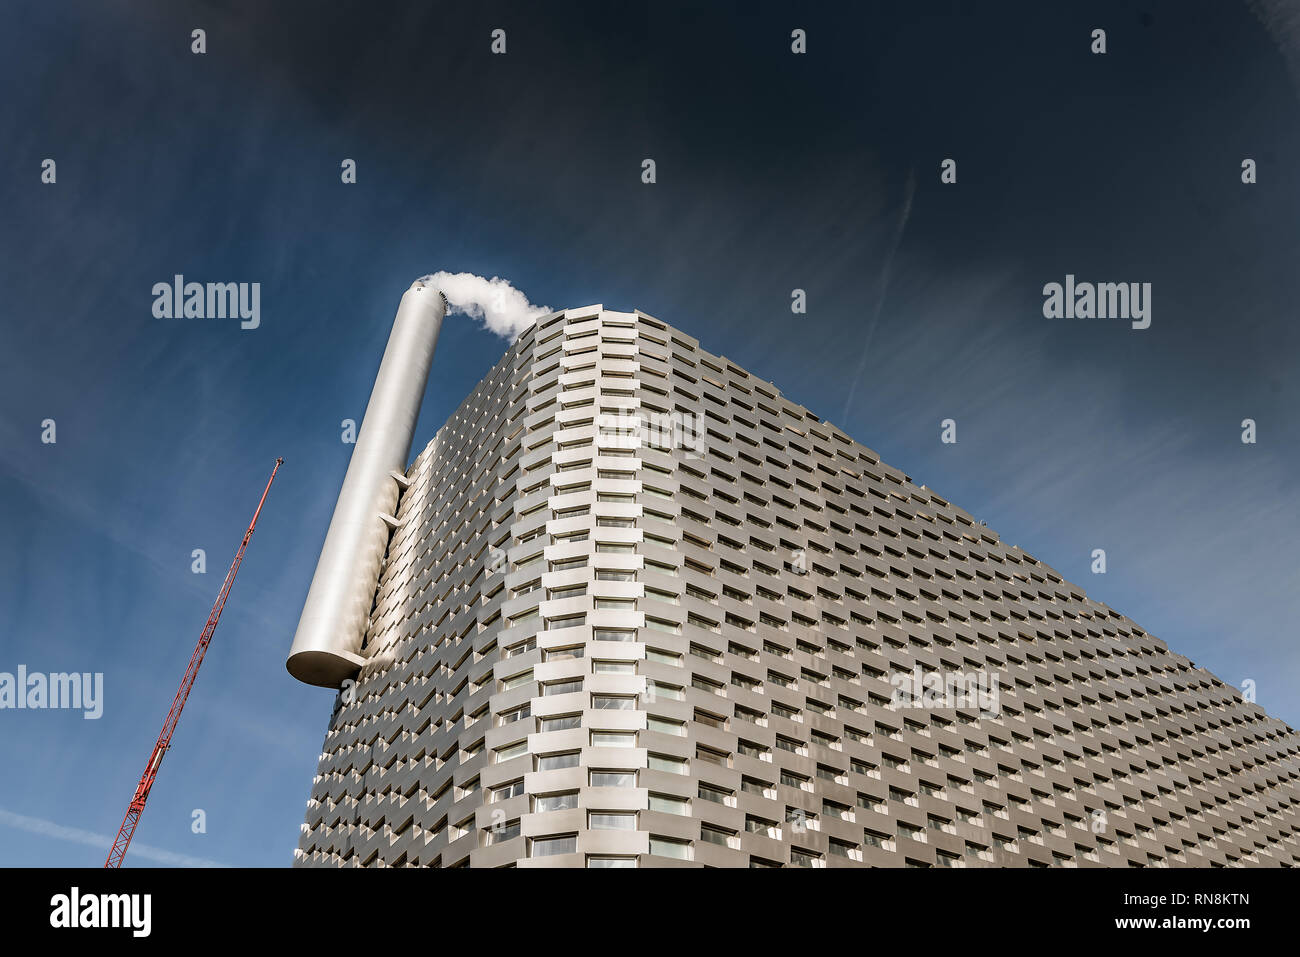 Futuristic incinerator with a big chimney and a 600 meters long ski slope on the roof, Copenhagen, February 16, 2019 Stock Photo